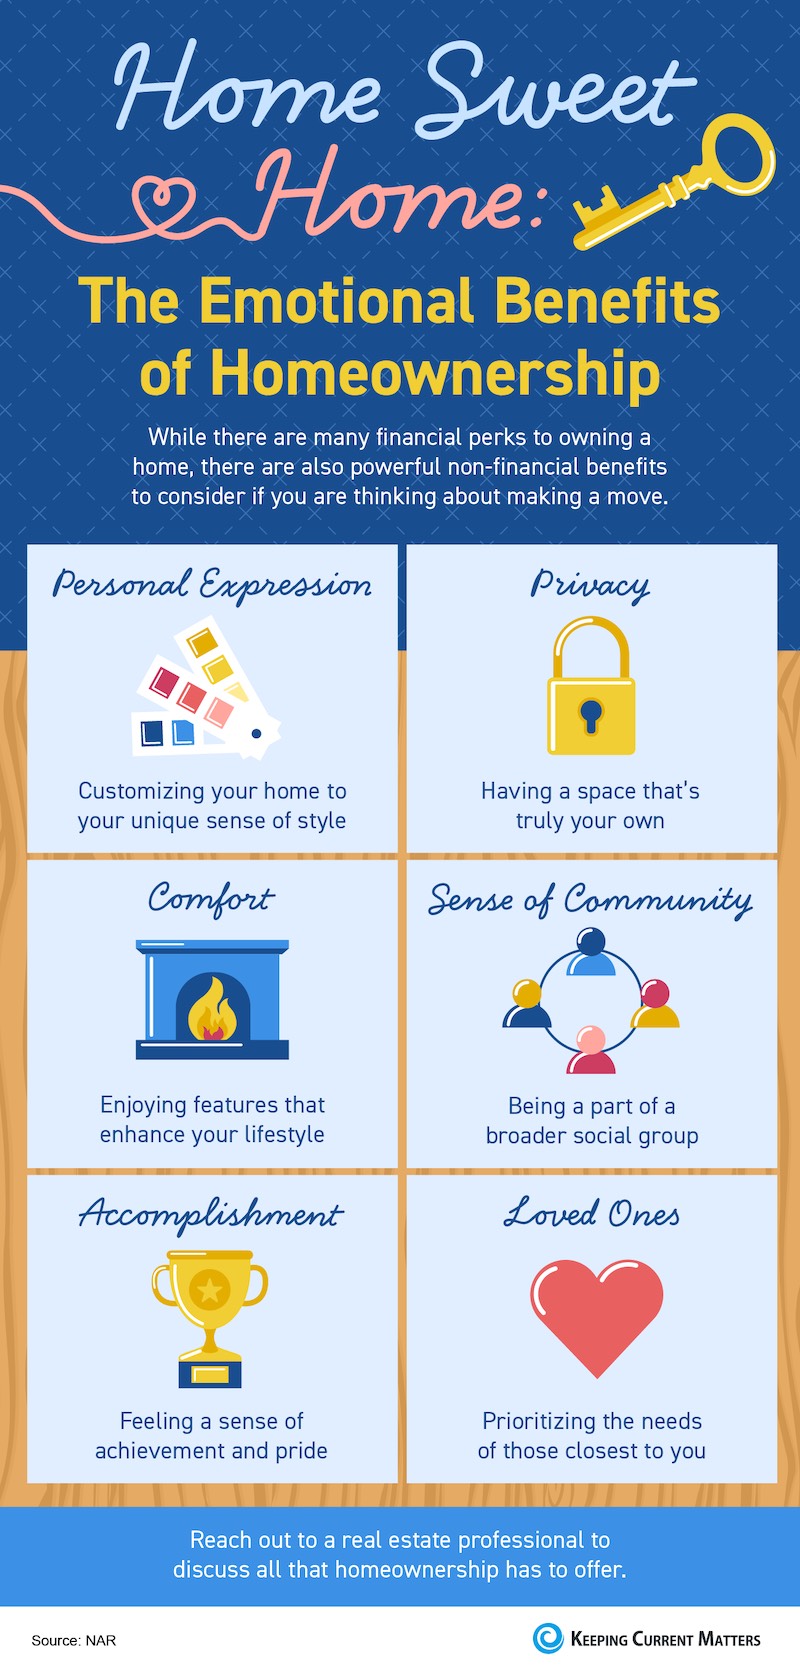 Home Sweet Home: The Emotional Benefits of Homeownership [INFOGRAPHIC] | Keeping Current Matters